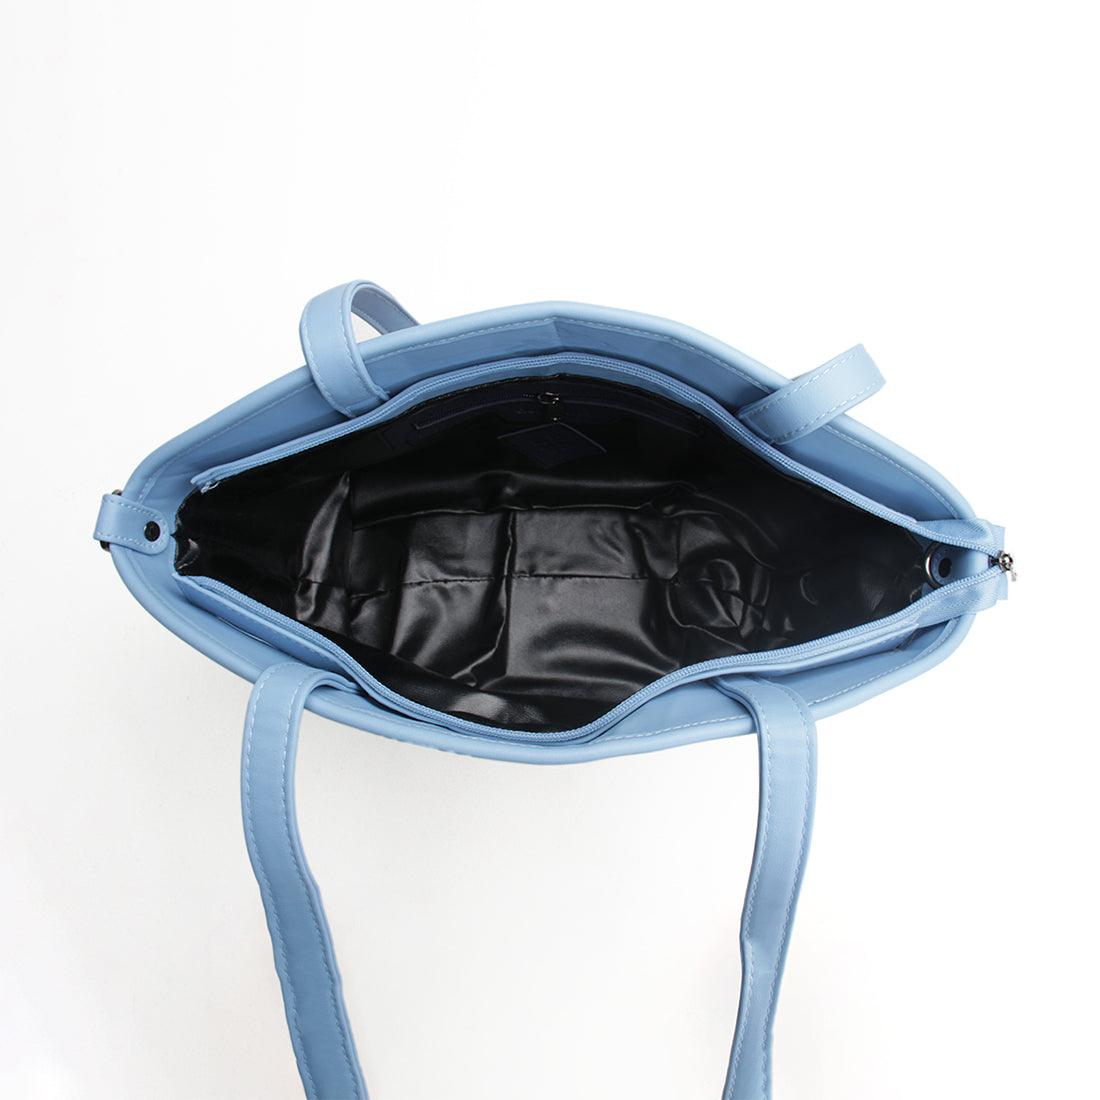 Blue Wide Tote Bag Little Fox - CANVAEGYPT